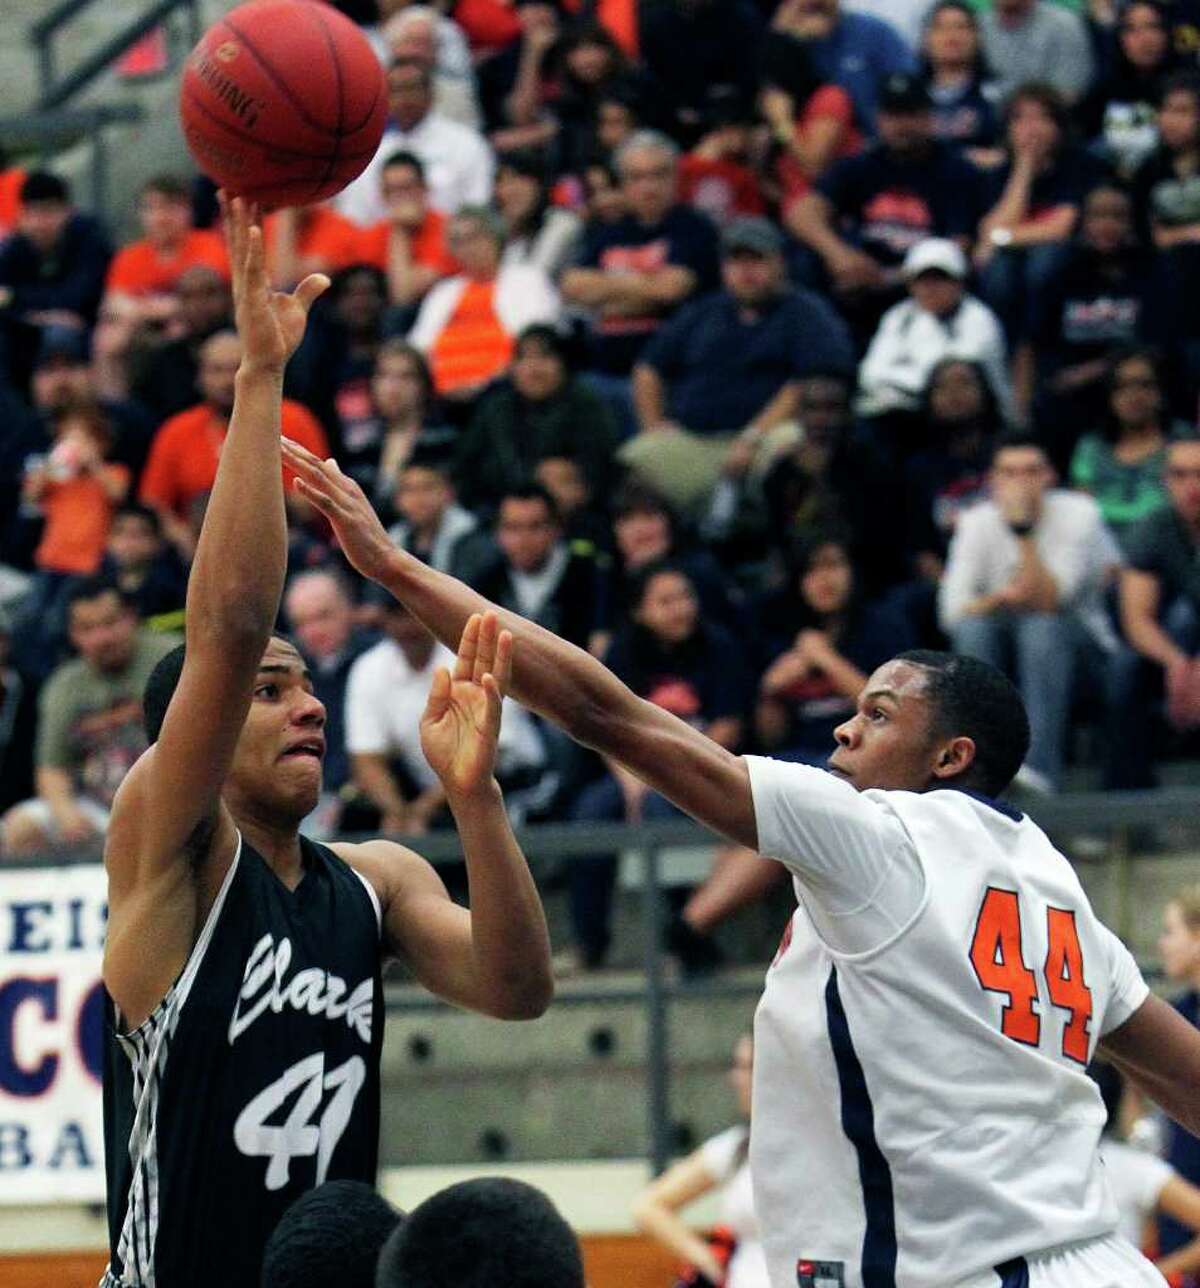 Clark post Shawn Gulley (left) gets off a shot despite the defensive efforts of Eric Robinson of Brandeis during the Class 5A third-round playoff game at Taylor Field House. The Cougars won 45-39.